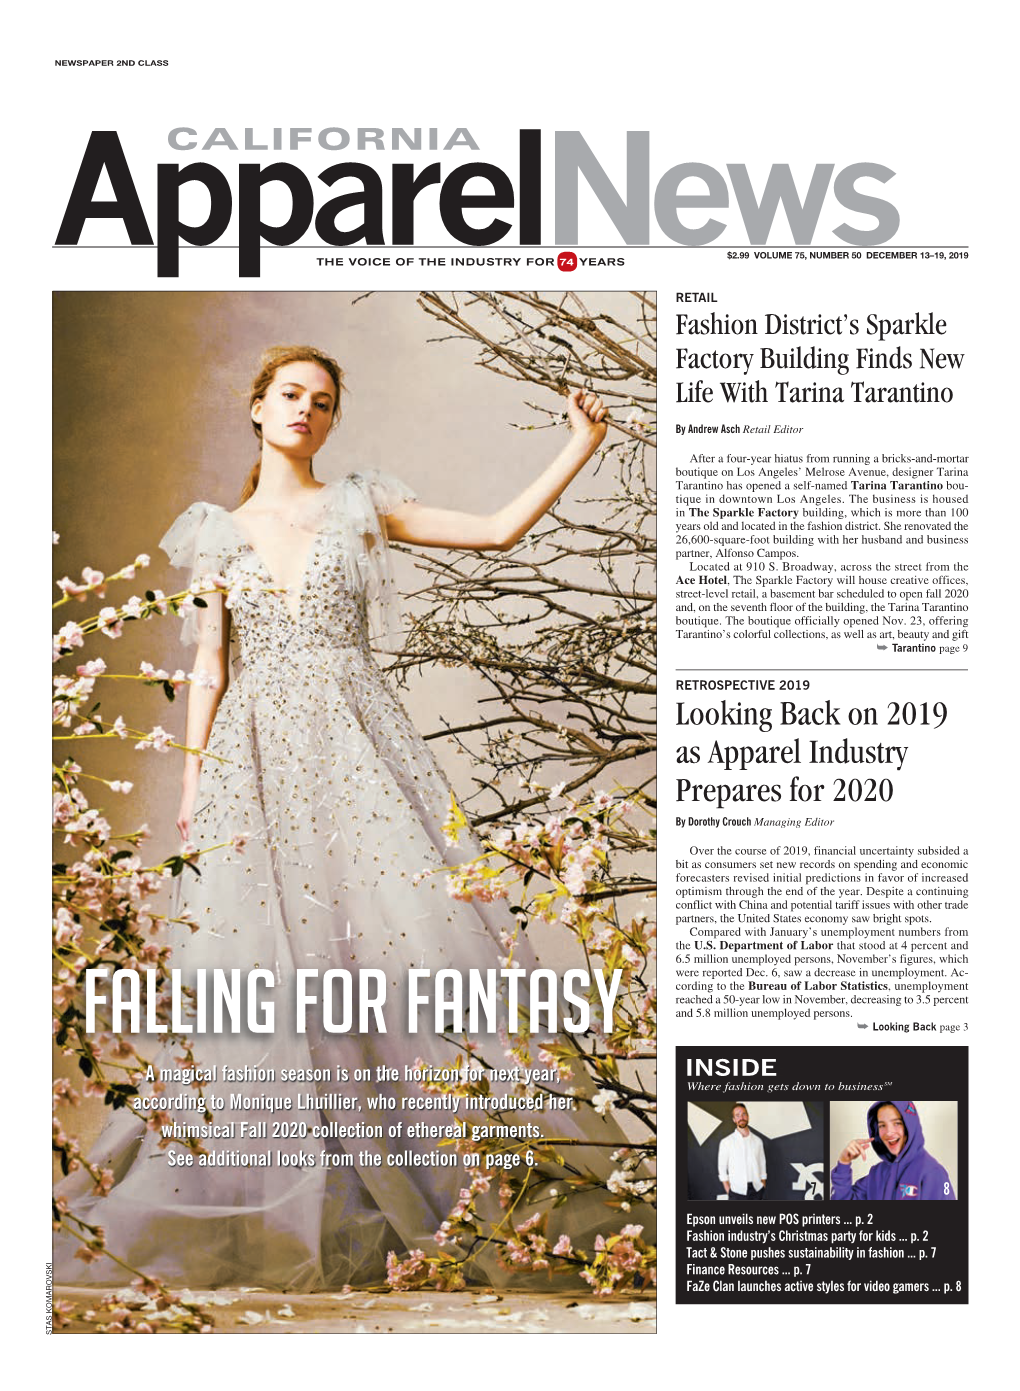 Looking Back on 2019 As Apparel Industry Prepares for 2020 by Dorothy Crouch Managing Editor